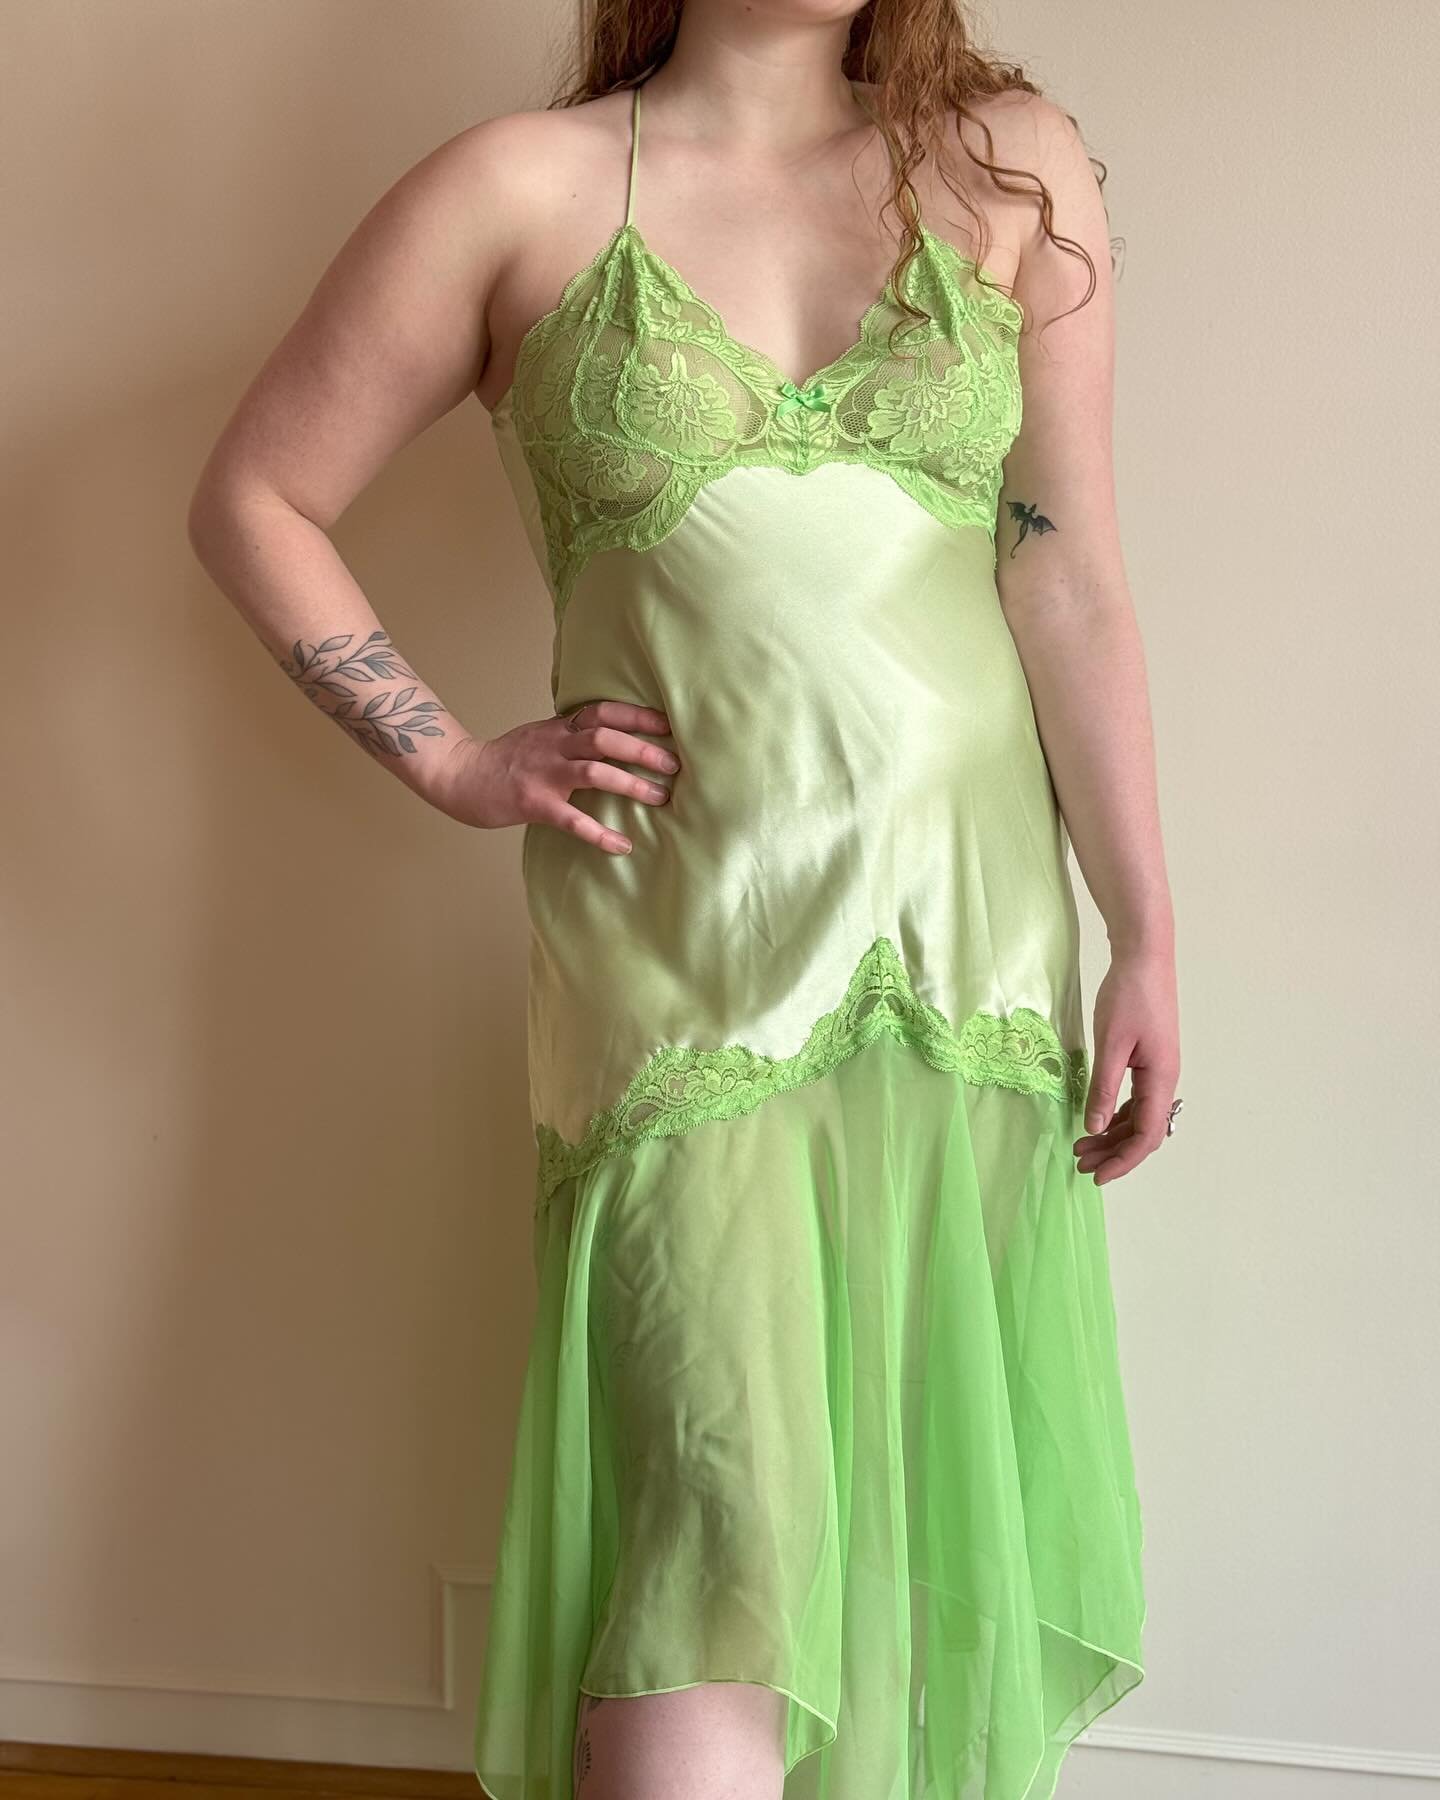 Whimsical lime lace slip dress / XL featured on Bailey / $60 / DM to purchase / Shipping available